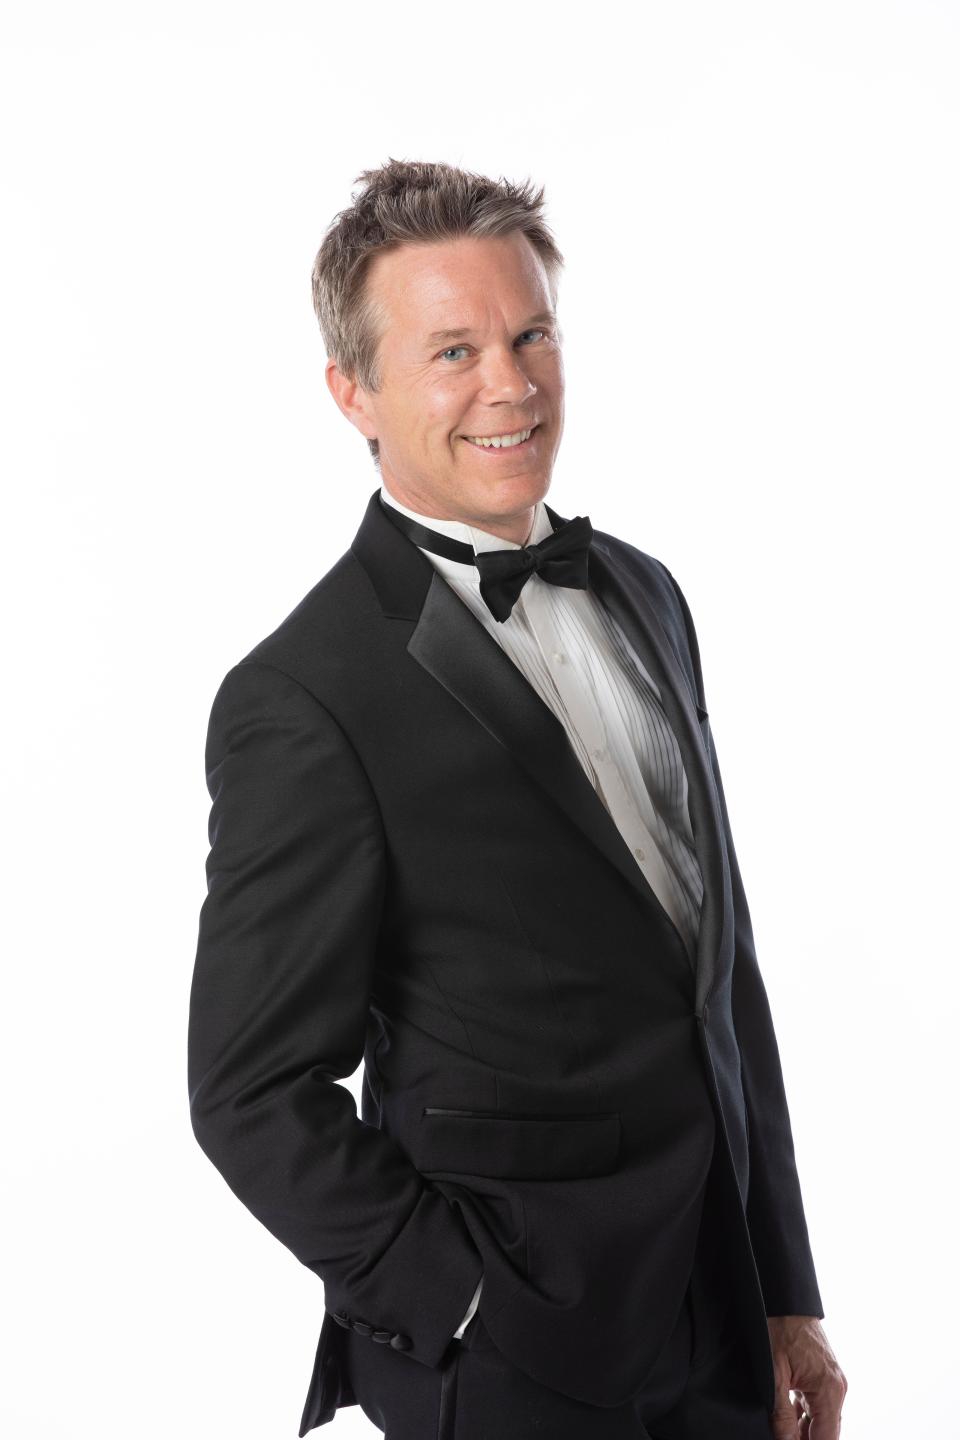 Maestro Alexander Mickelthwate is the music director for Oklahoma City Philharmonic.